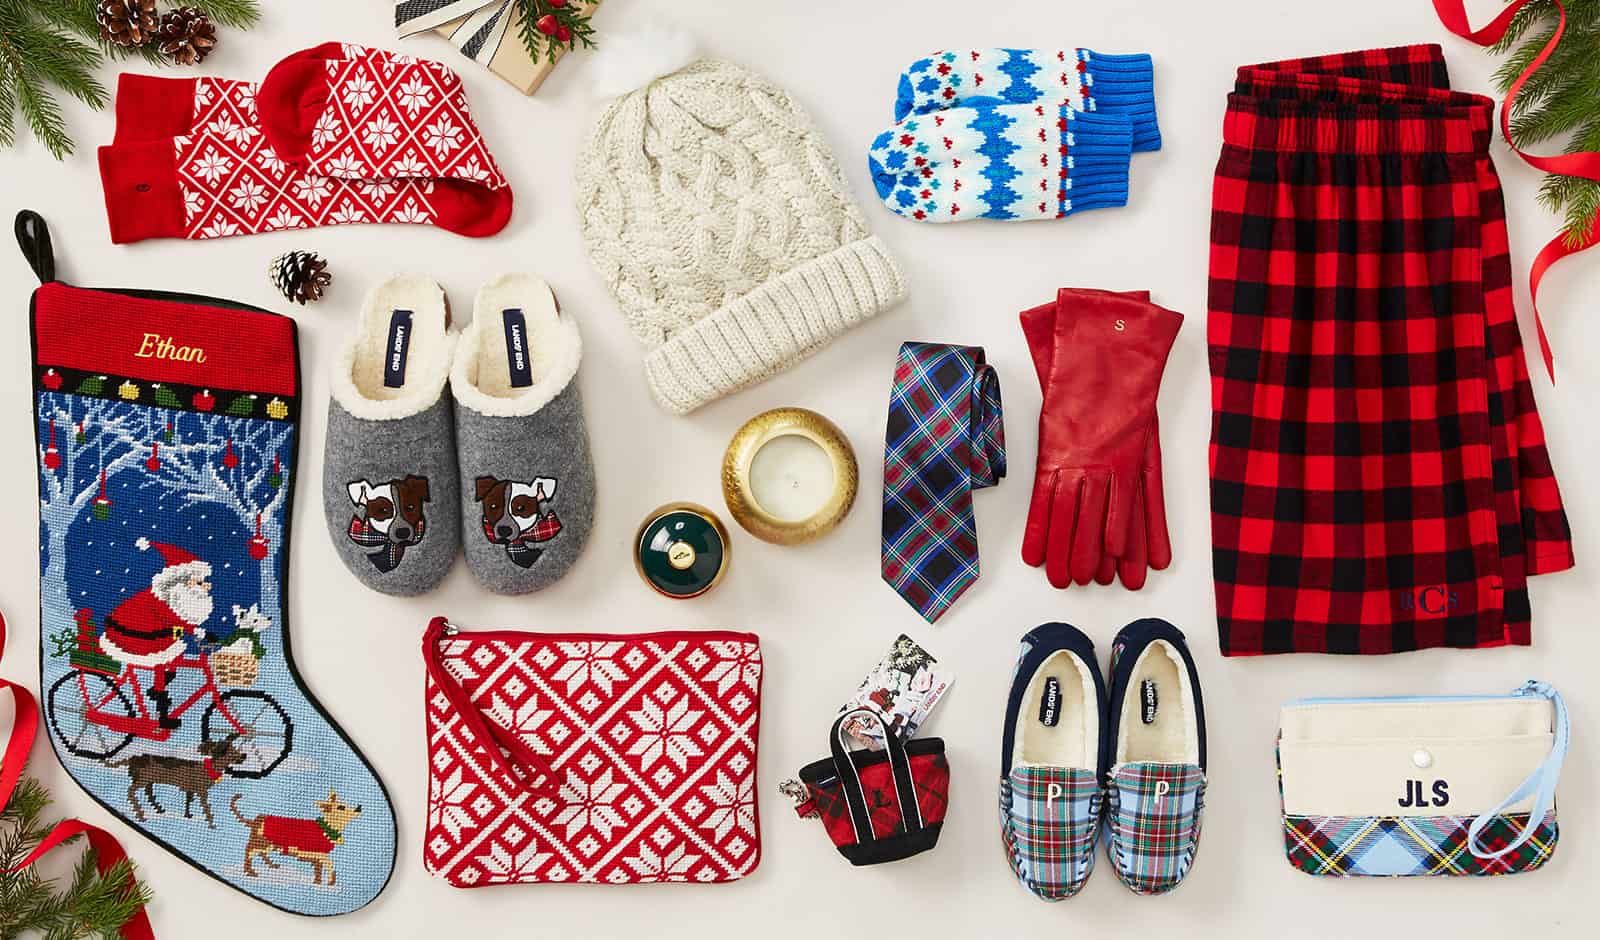 Monogrammed Gifts Mean Holiday Cheer | Lands' End